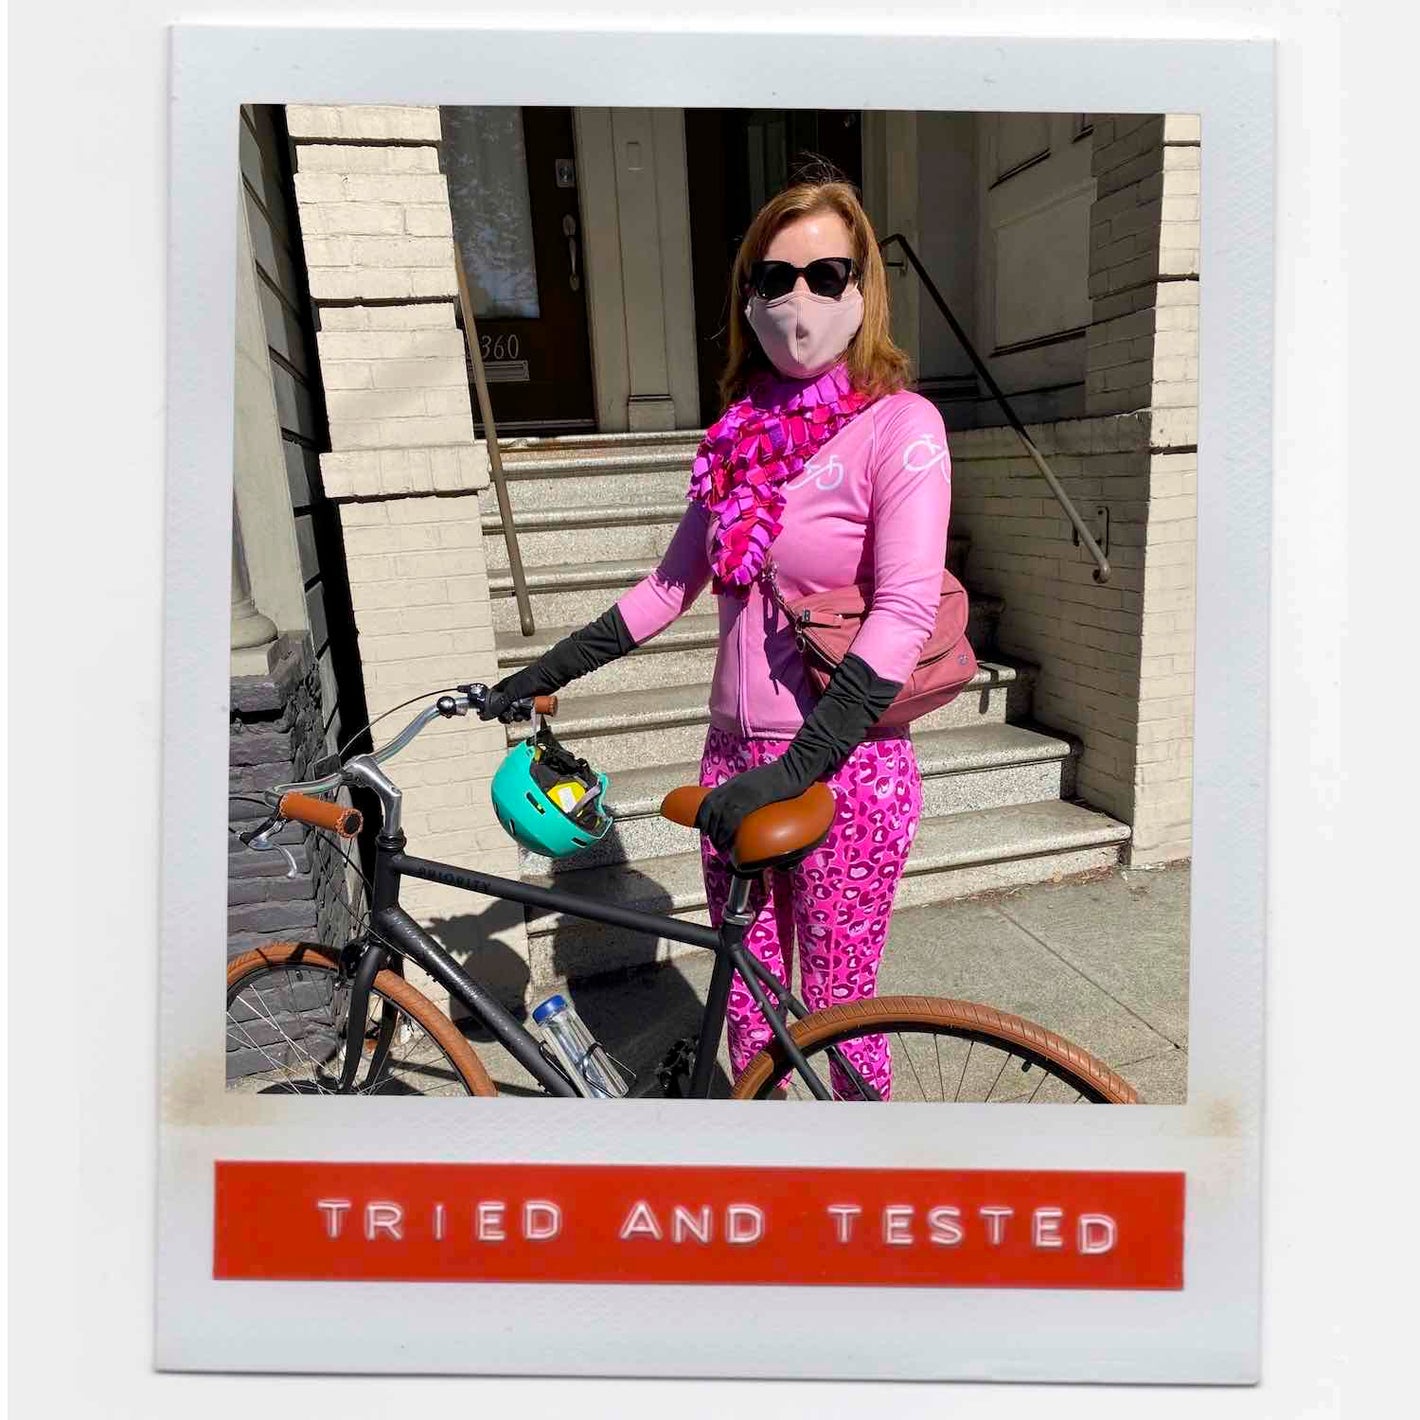 Melinda feeling fab with her happy multicolor fashion boa scarf style outfit while riding her bike around San Francisco.